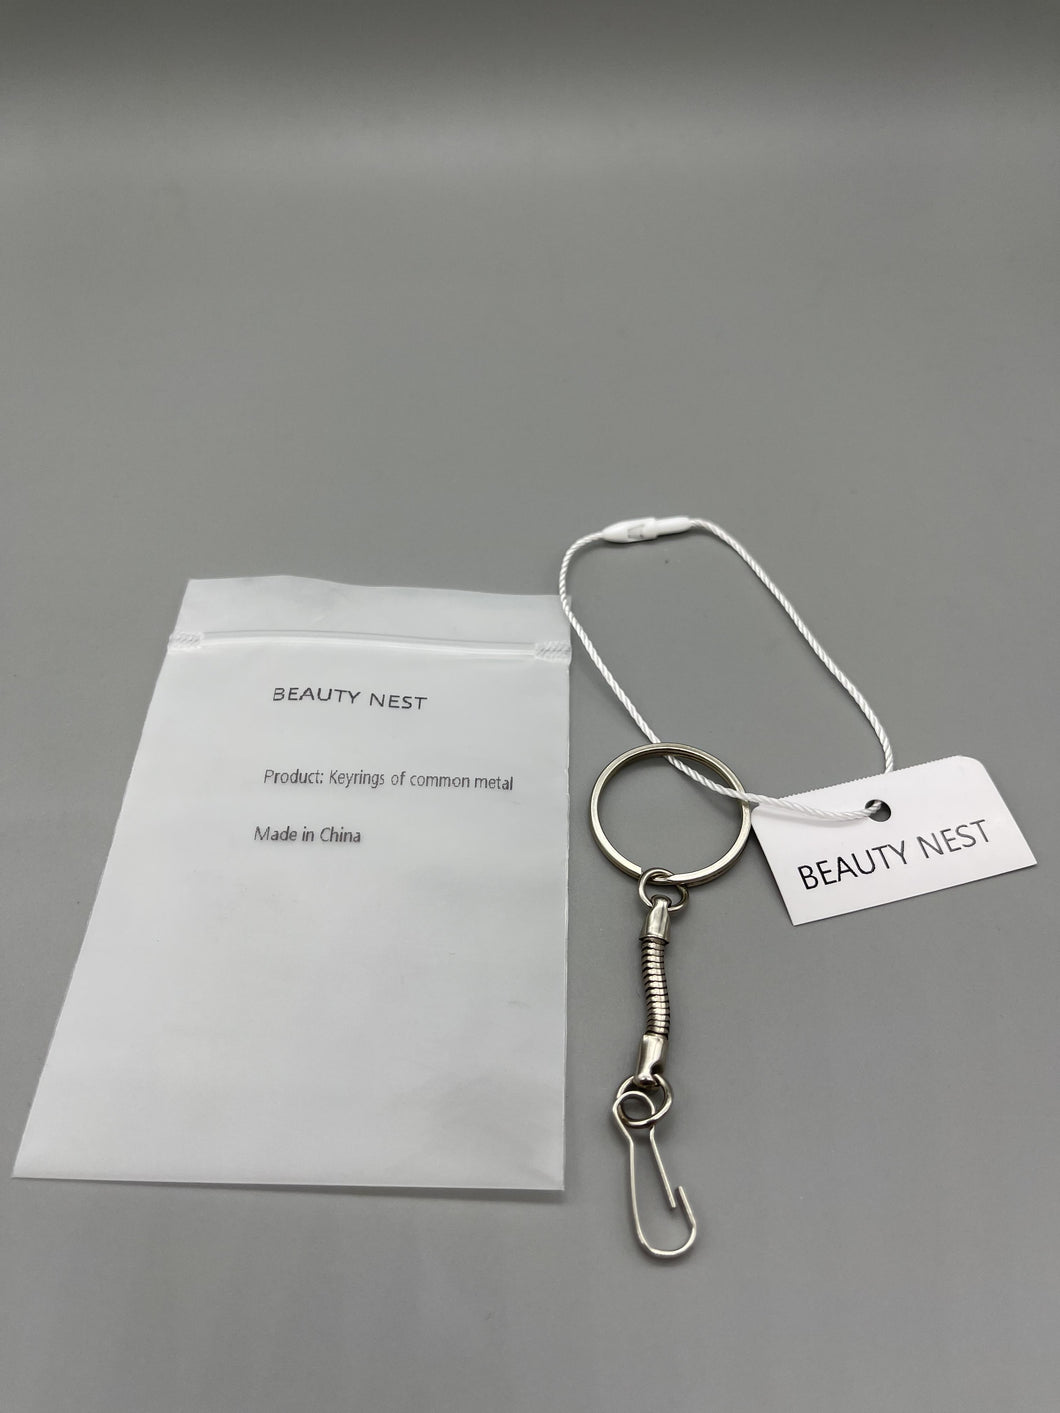 BEAUTY NEST Keyrings of common metal,50PCS Split Key Ring with Chain and Jump Rings,Split Key Ring with Chain Silver Color Metal Split Key Chain Ring Parts with Open Jump Ring and Connector.